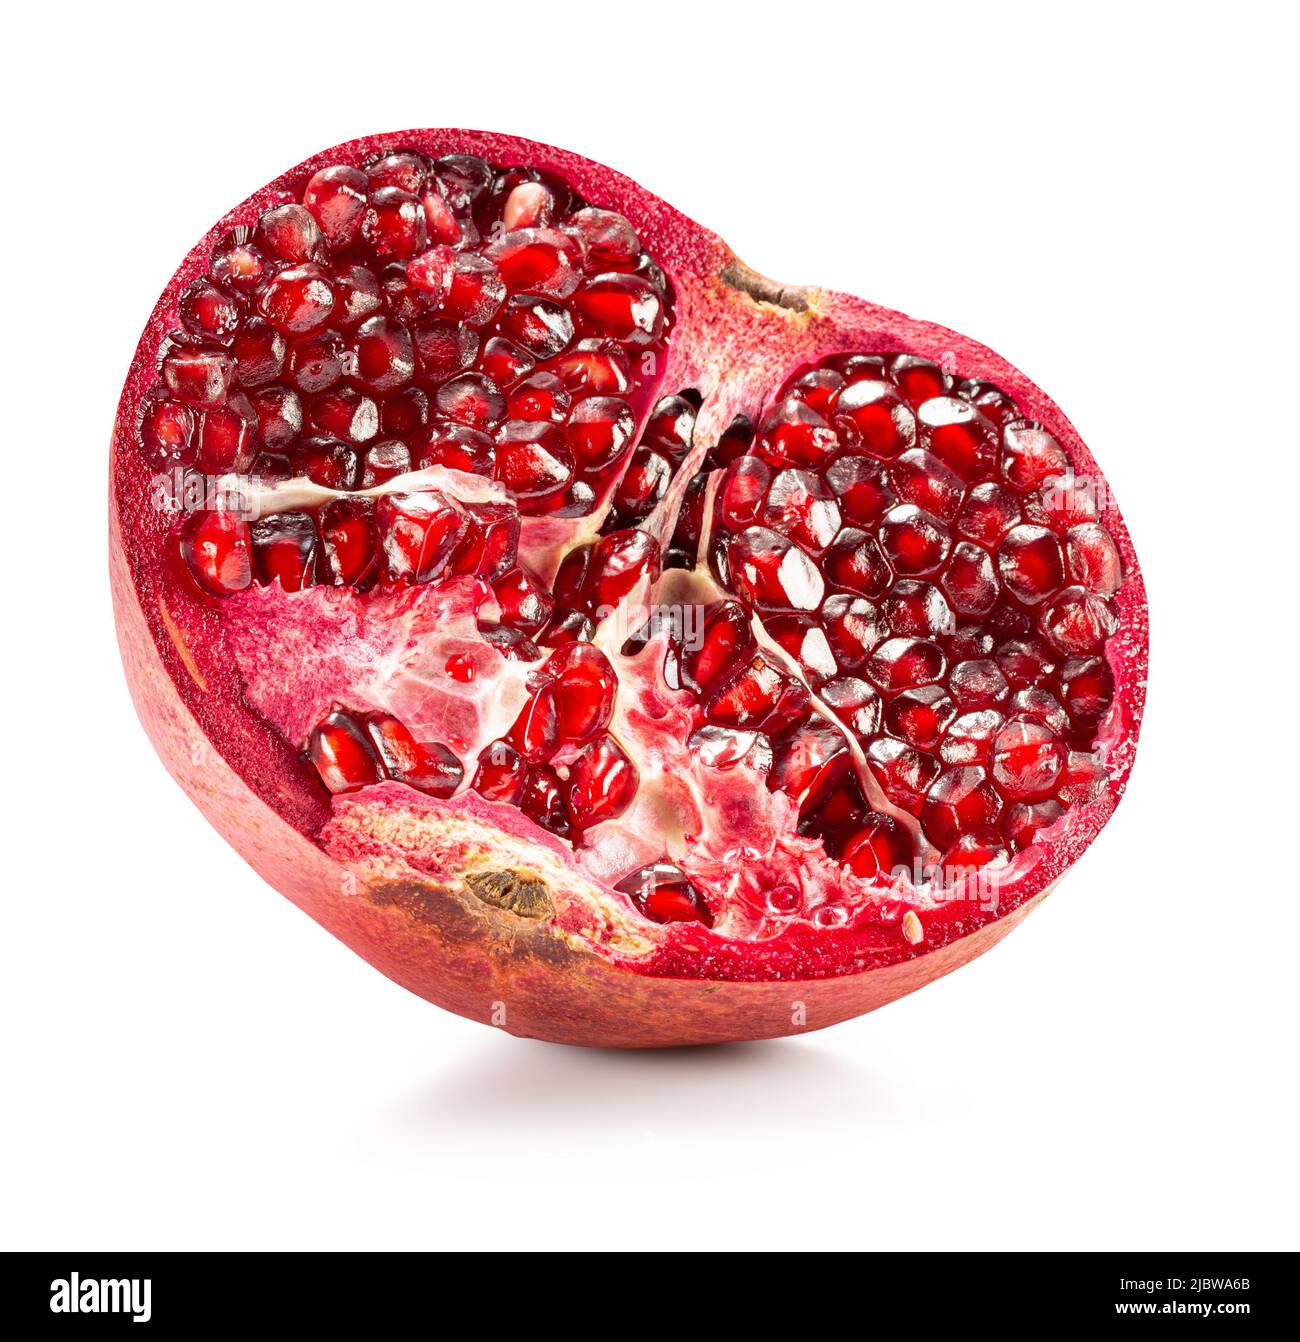 half of pomegranate with red seeds isolated on a white background with clipping path. Stock Photo